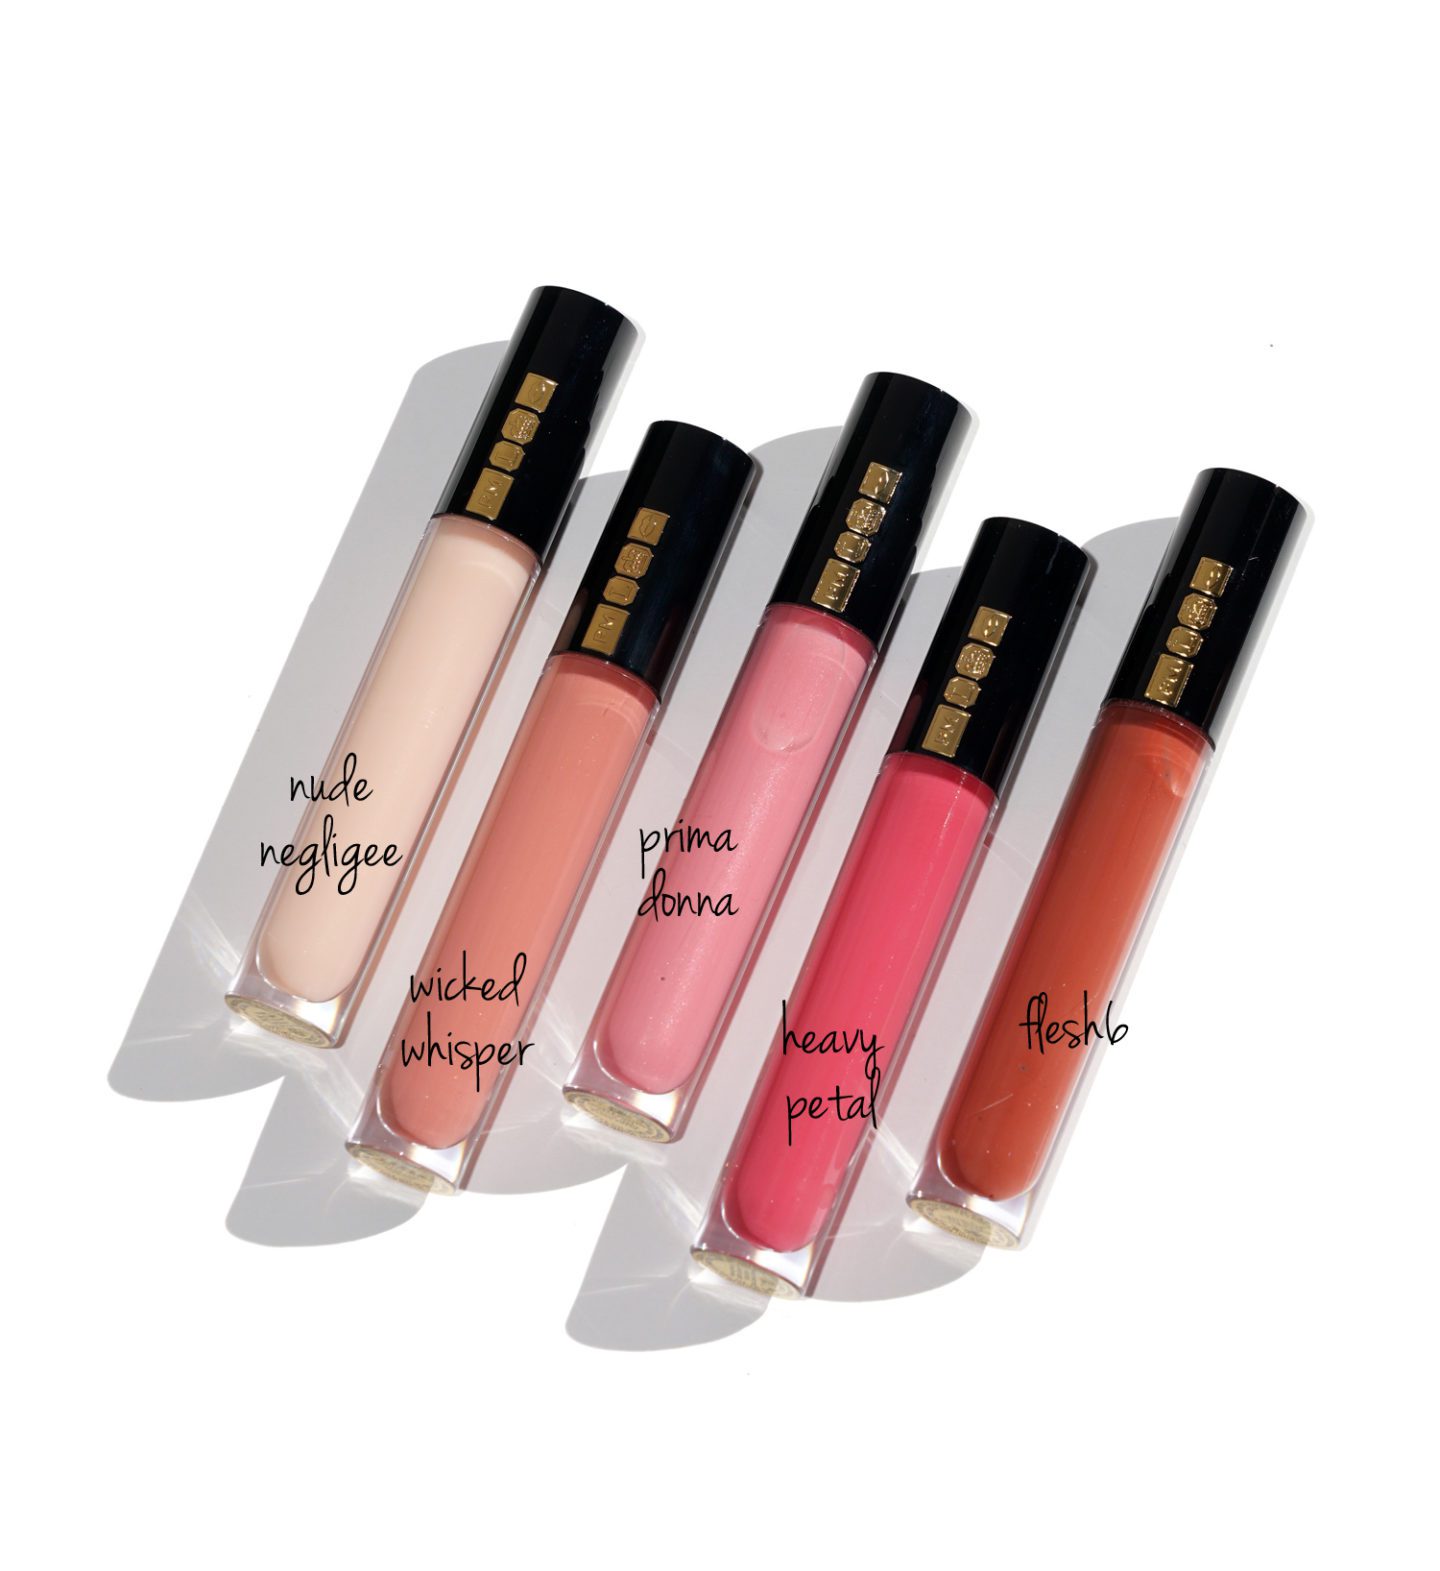 Pat McGrath LUST Gloss Nude Negligee, Wicked Whisper, Prima Donna, Heavy Petal, Flesh6 | The Beauty Look Book